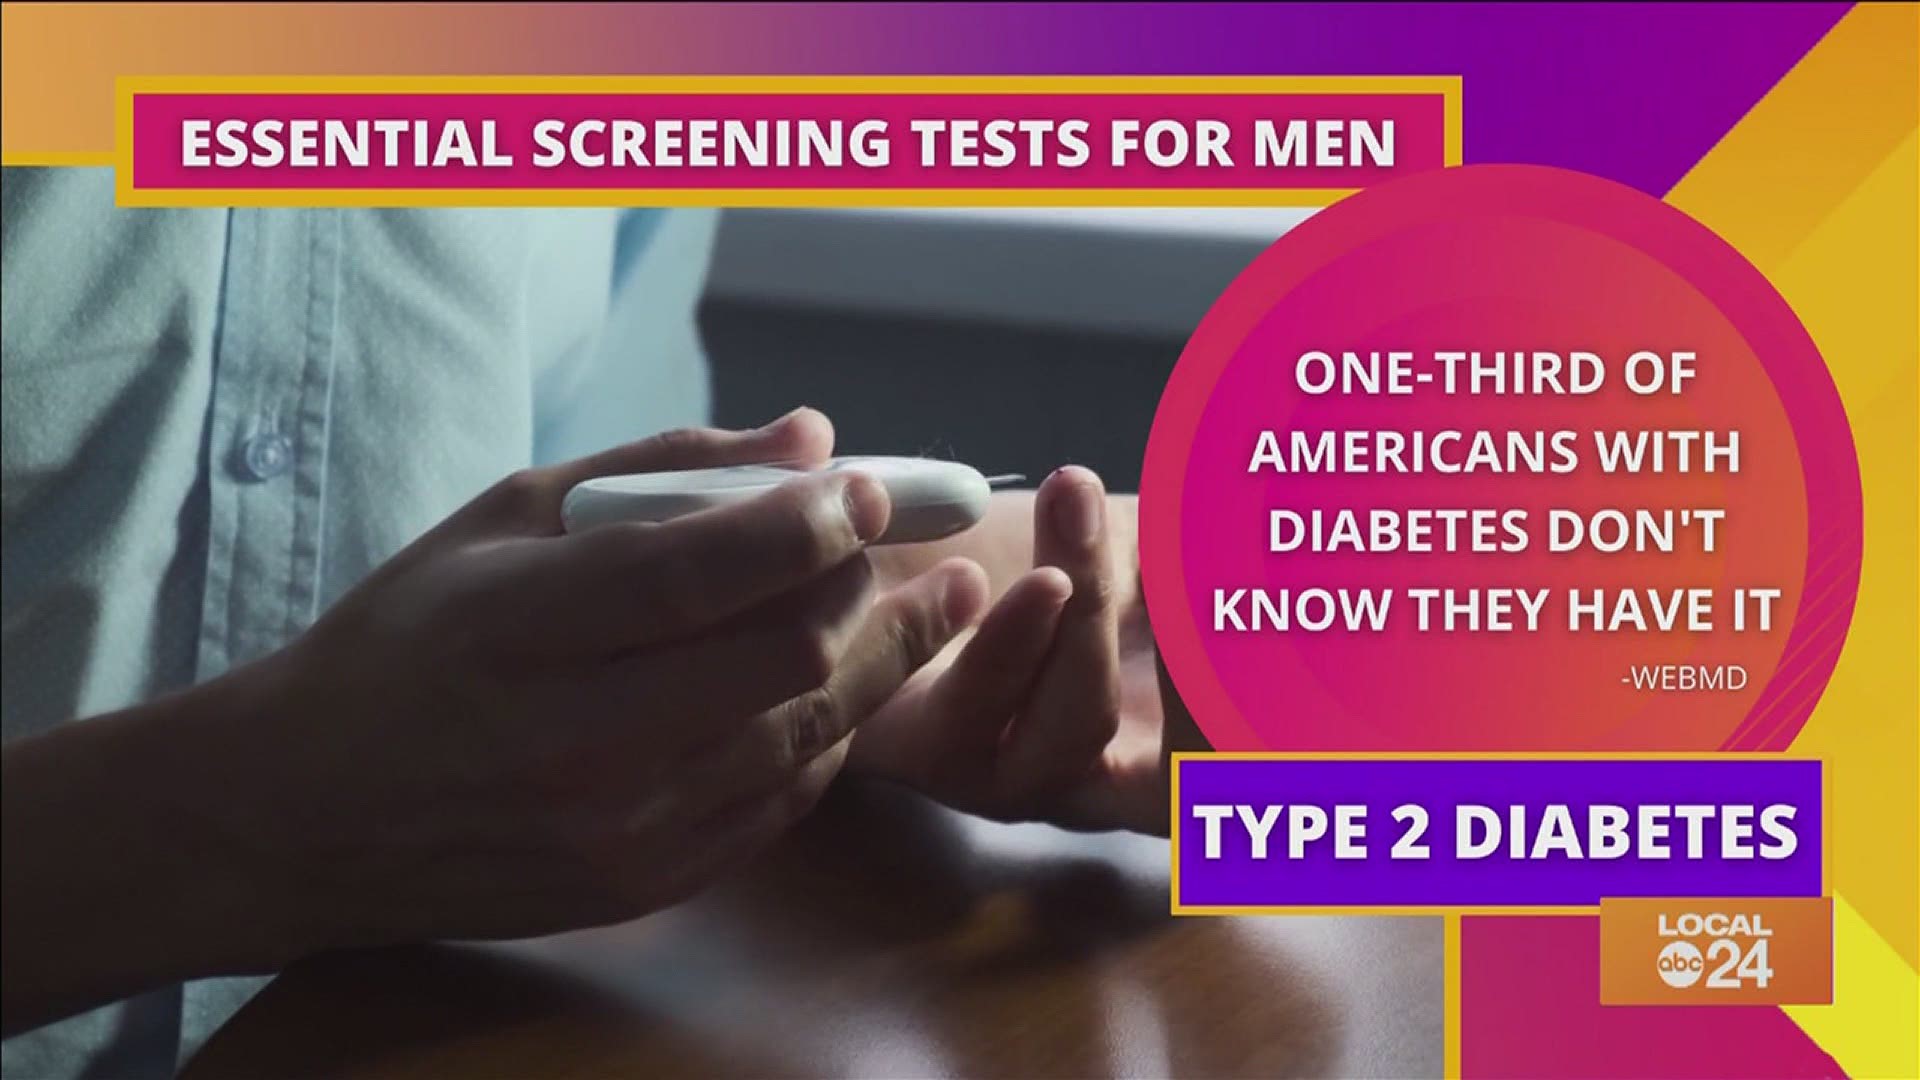 From colon cancer to type-2 diabetes, join Sydney Neely as we take a look at 4 of the most important health screenings for men in honor of Men's Health Week!